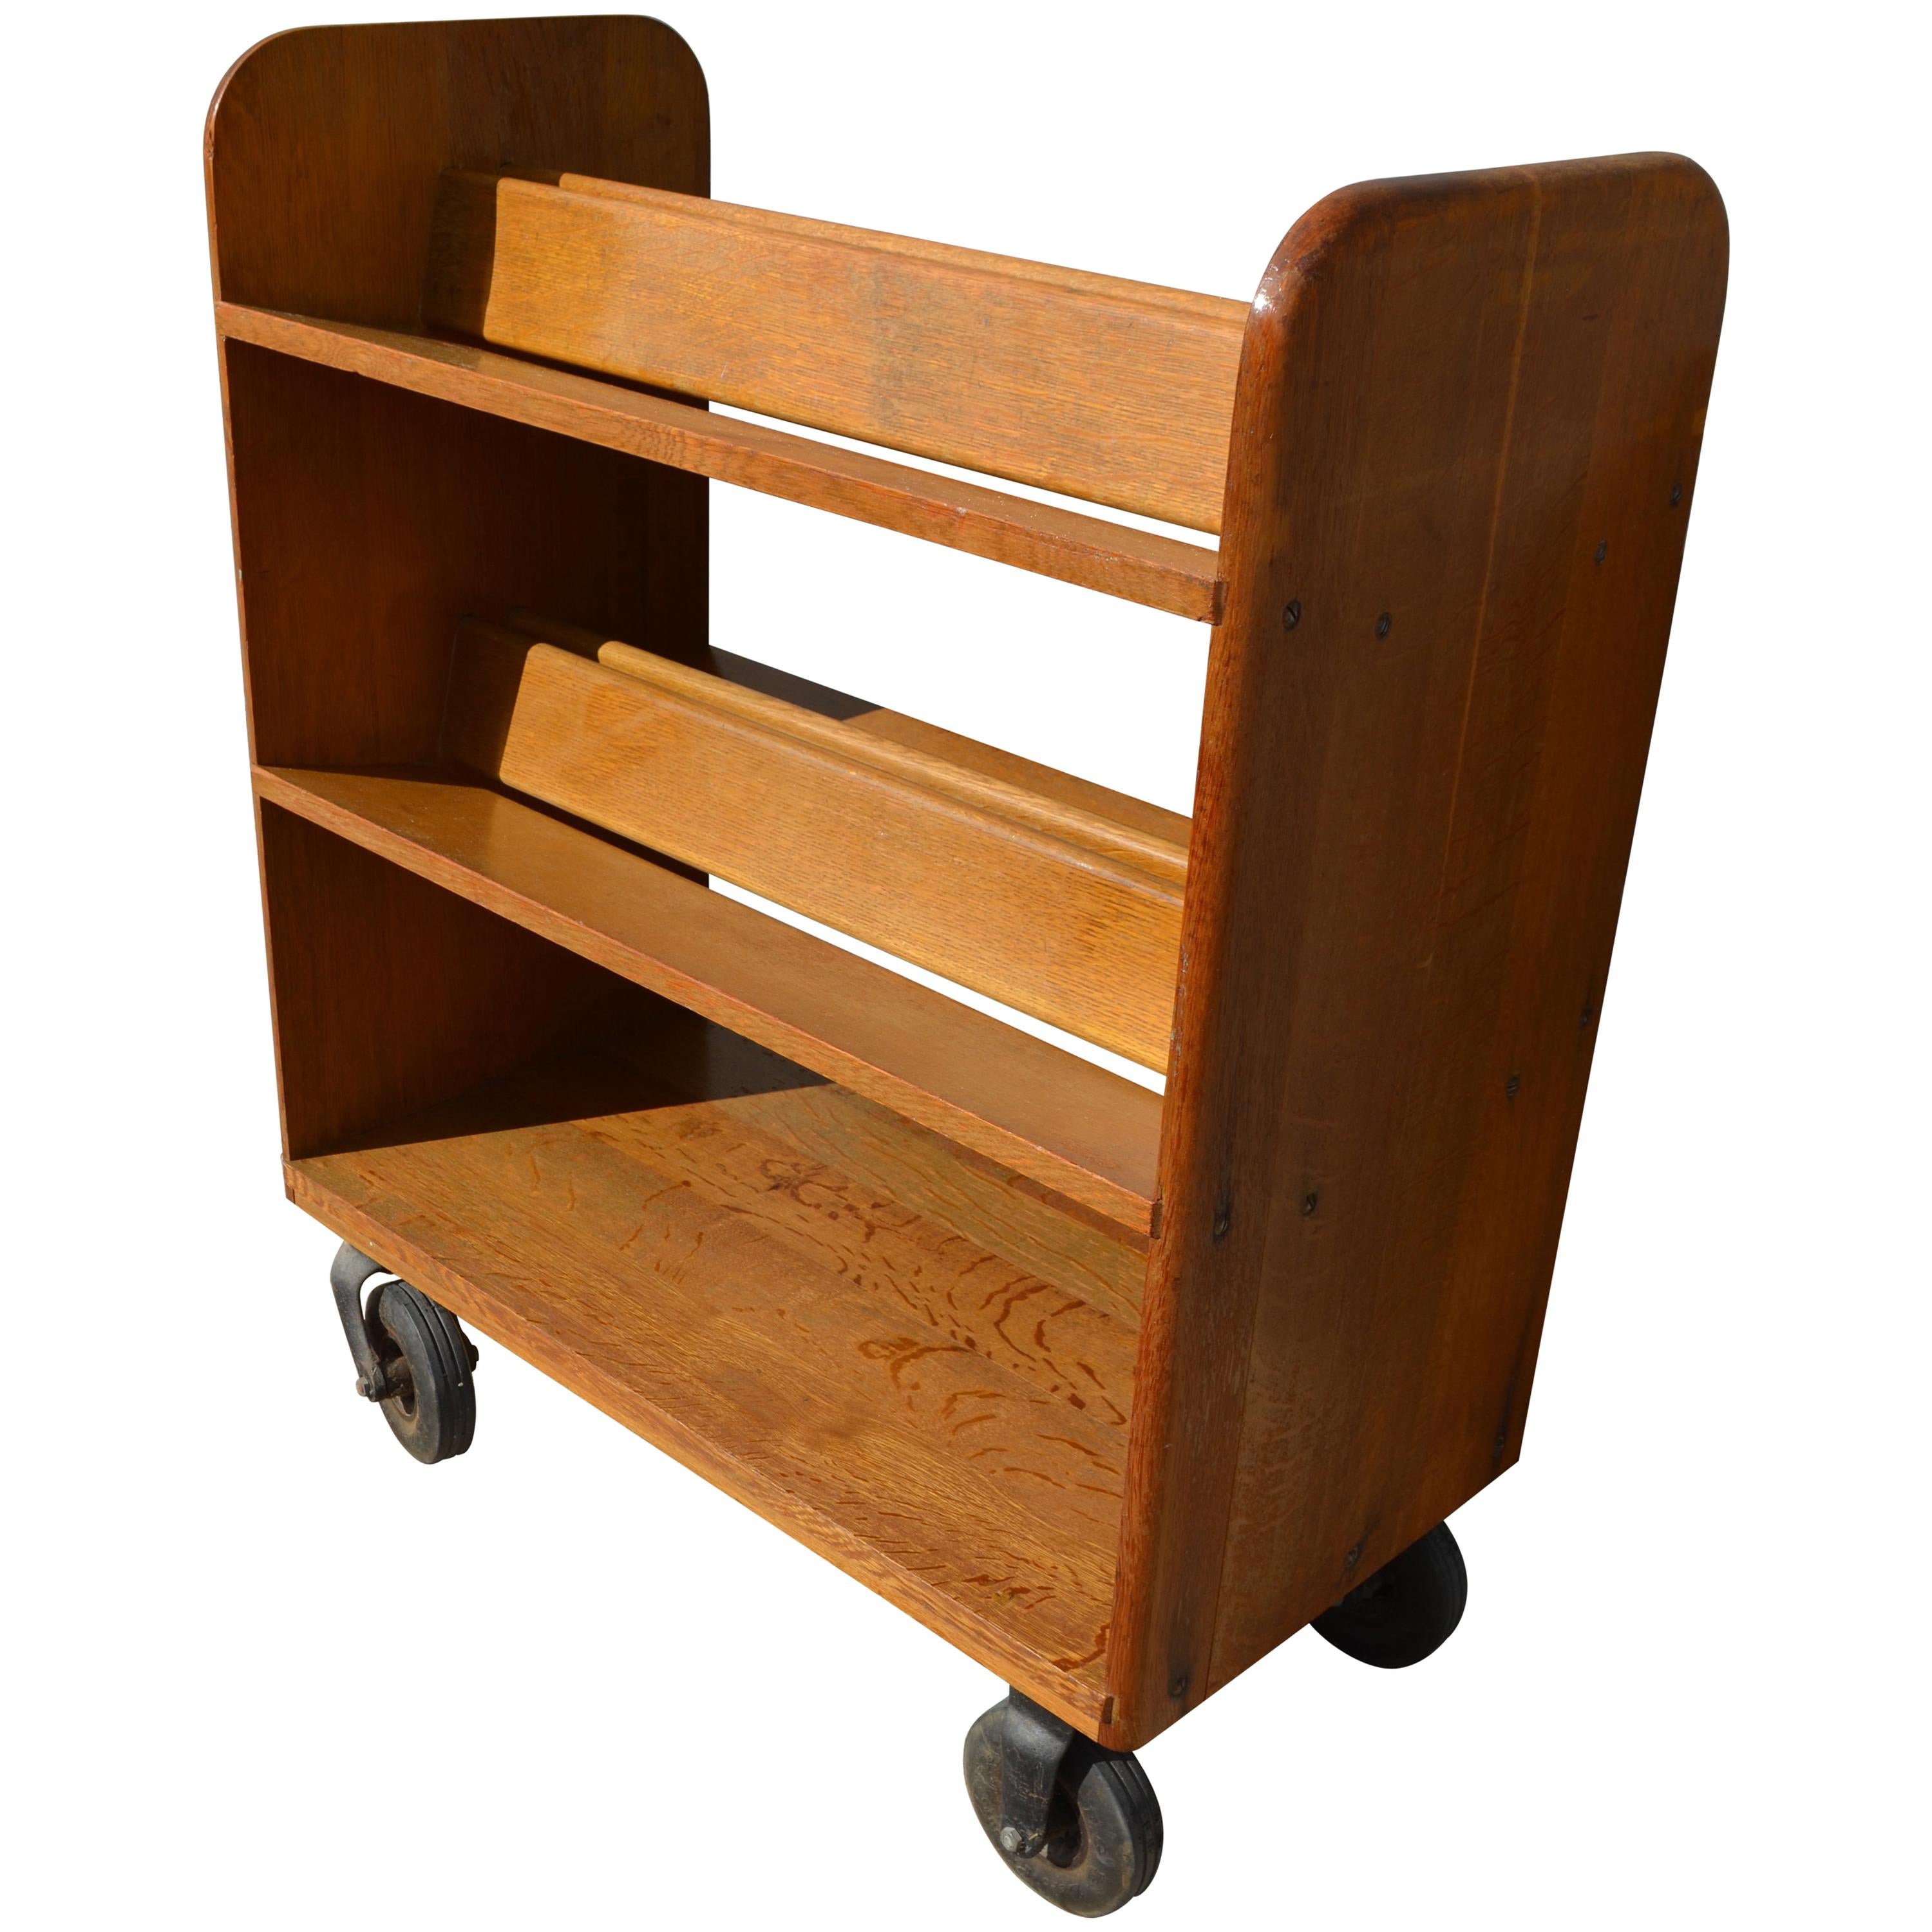 Midcentury Oak Book Cart with slanted Shelves on Wheels from Public Library